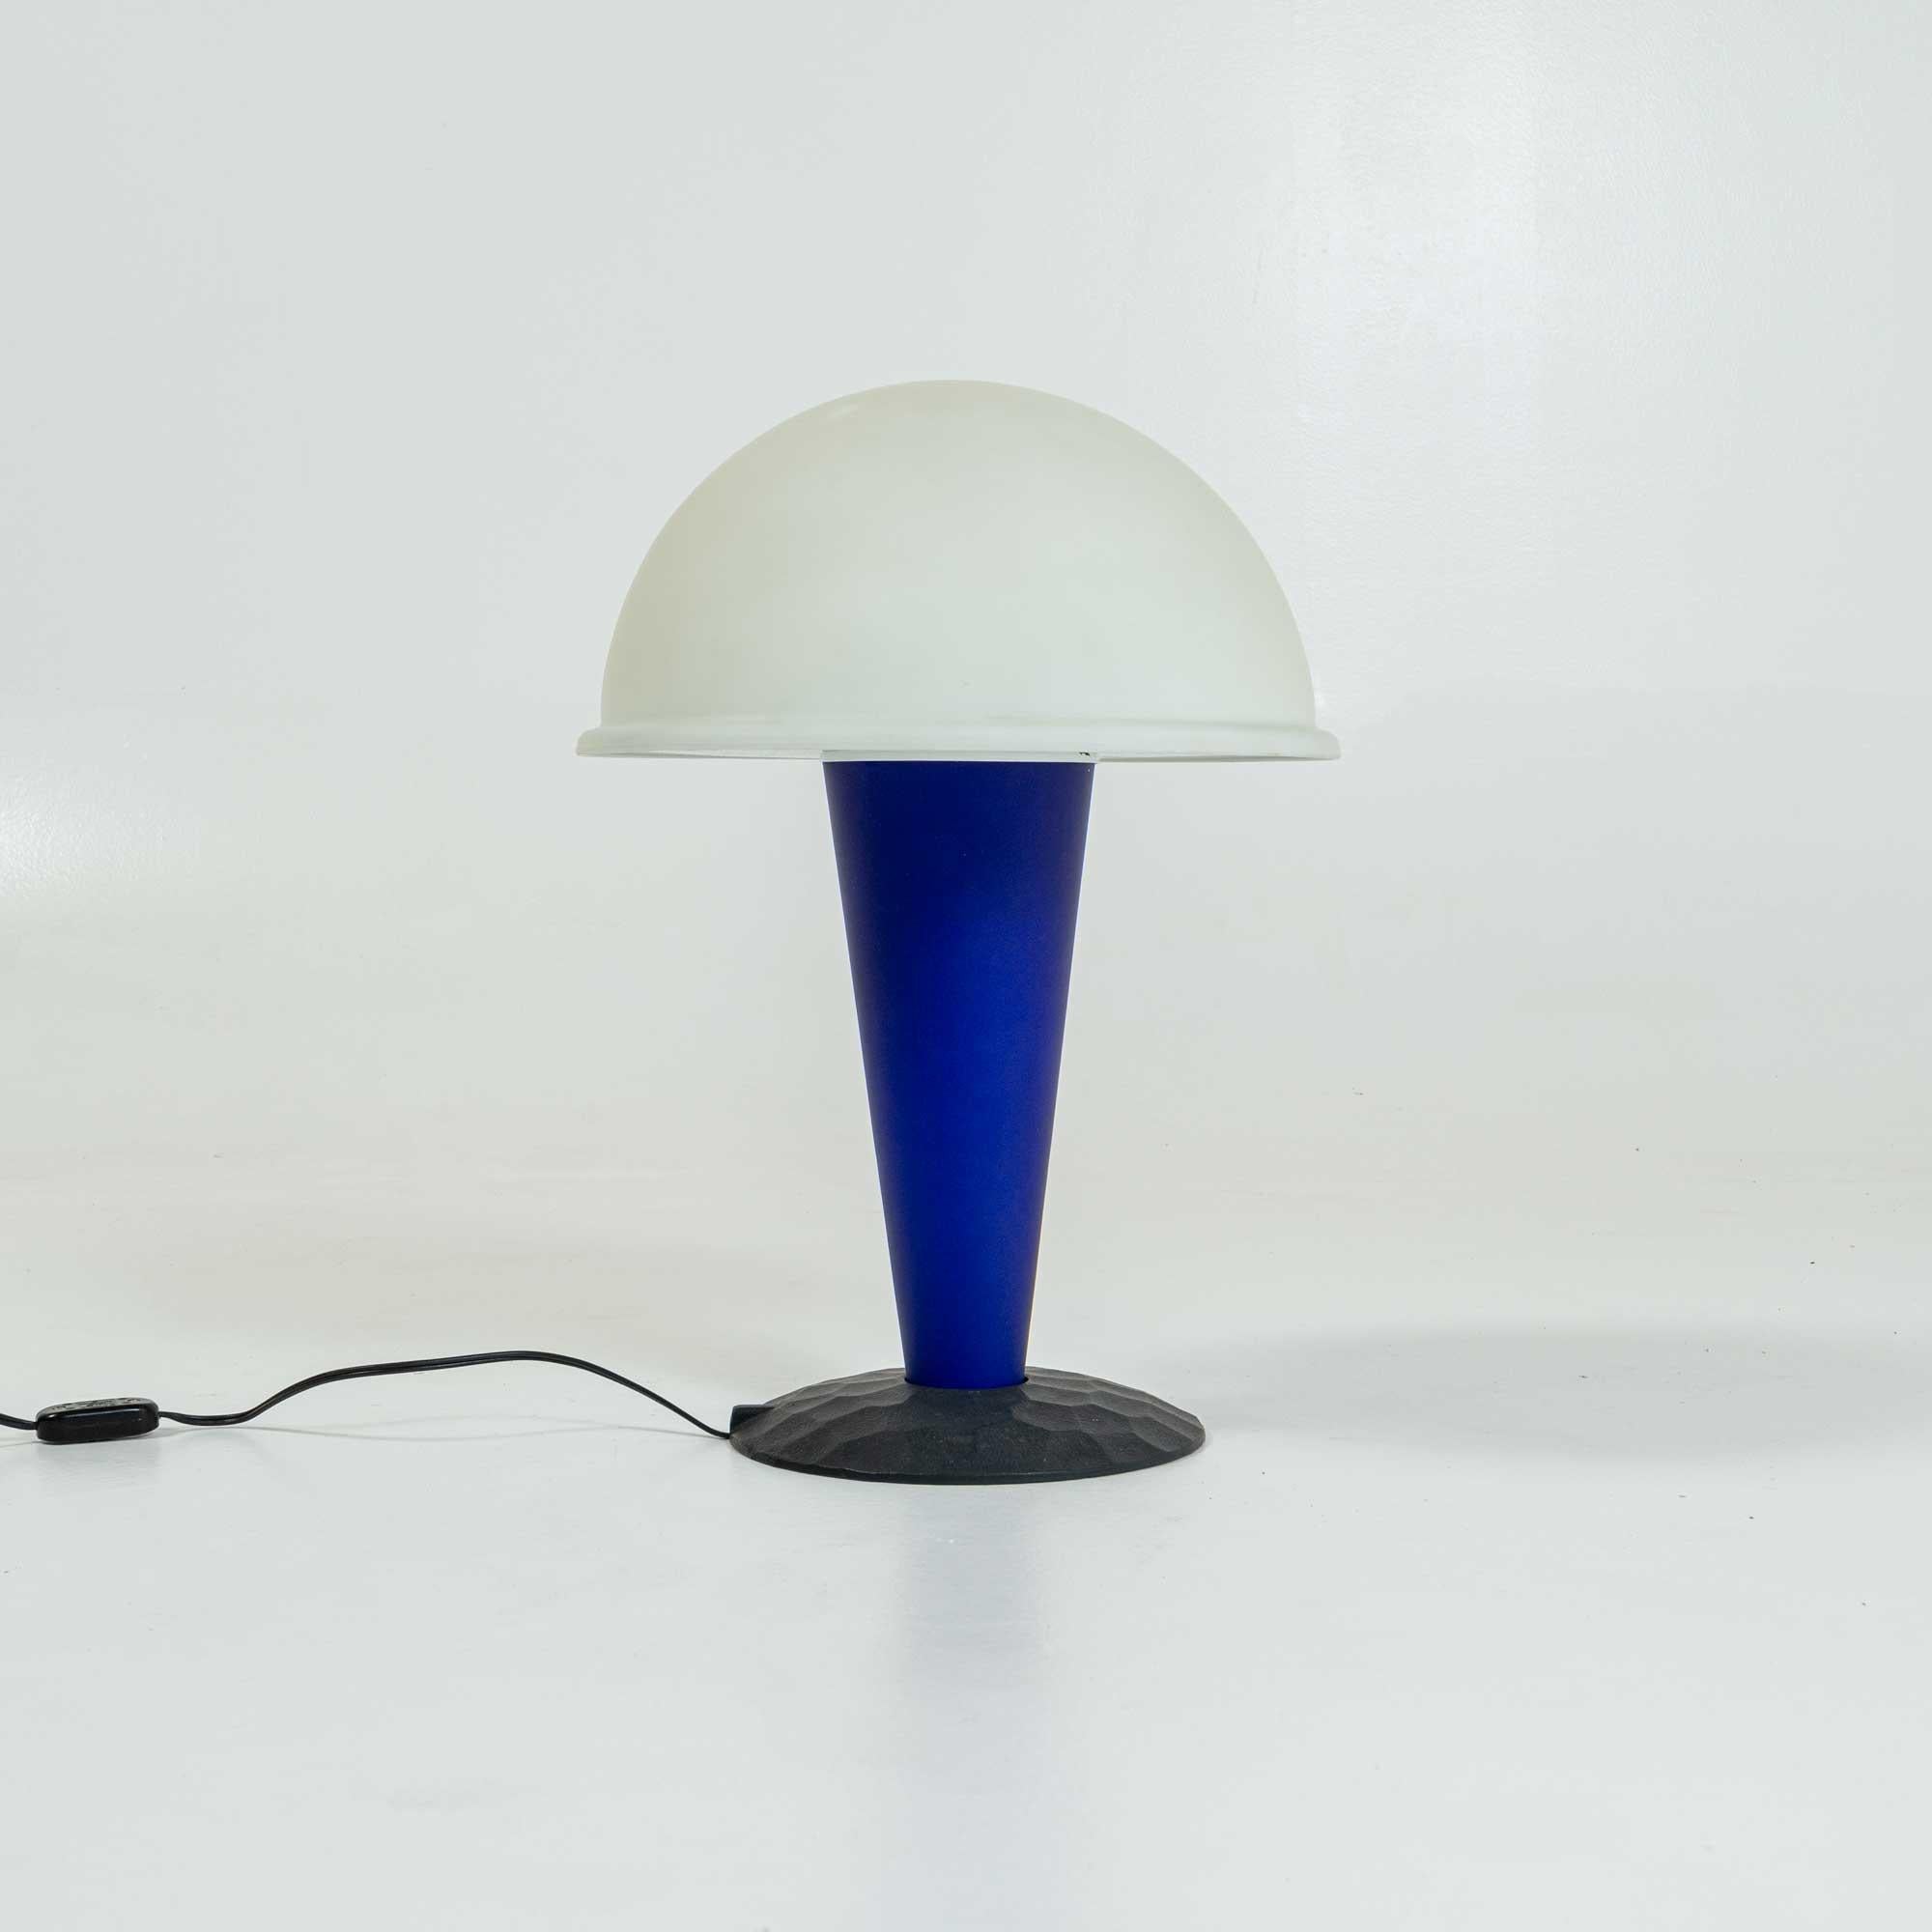 A Modern table lamp by Ron Rezek, circa 1980s. Also known as the 